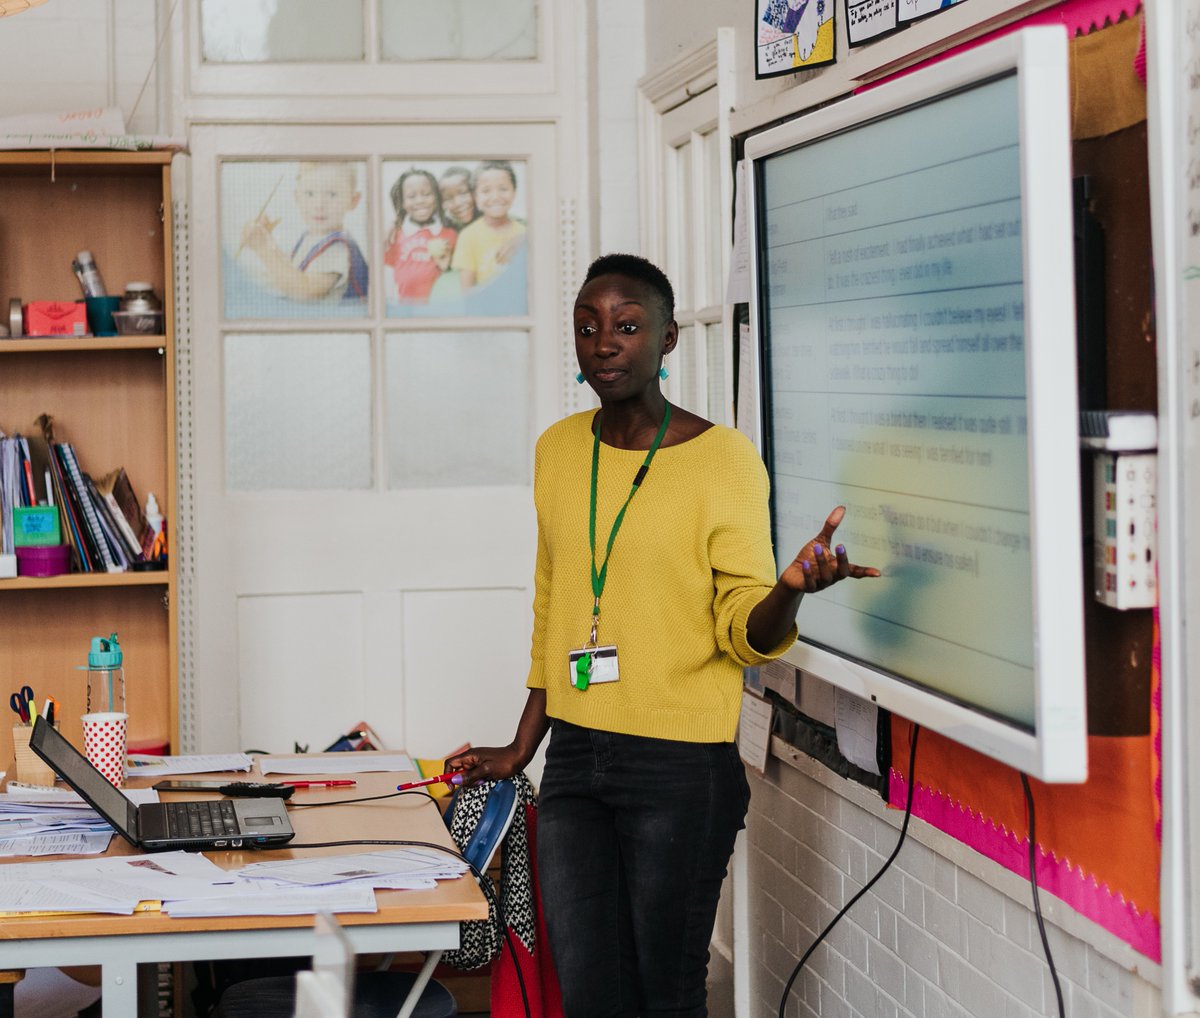 🌟 Today, we've published an independent evaluation led by @SHU_SIoE of a pilot project to support evidence-informed school improvement across Bristol. Read more: eef.li/BY2ZKN